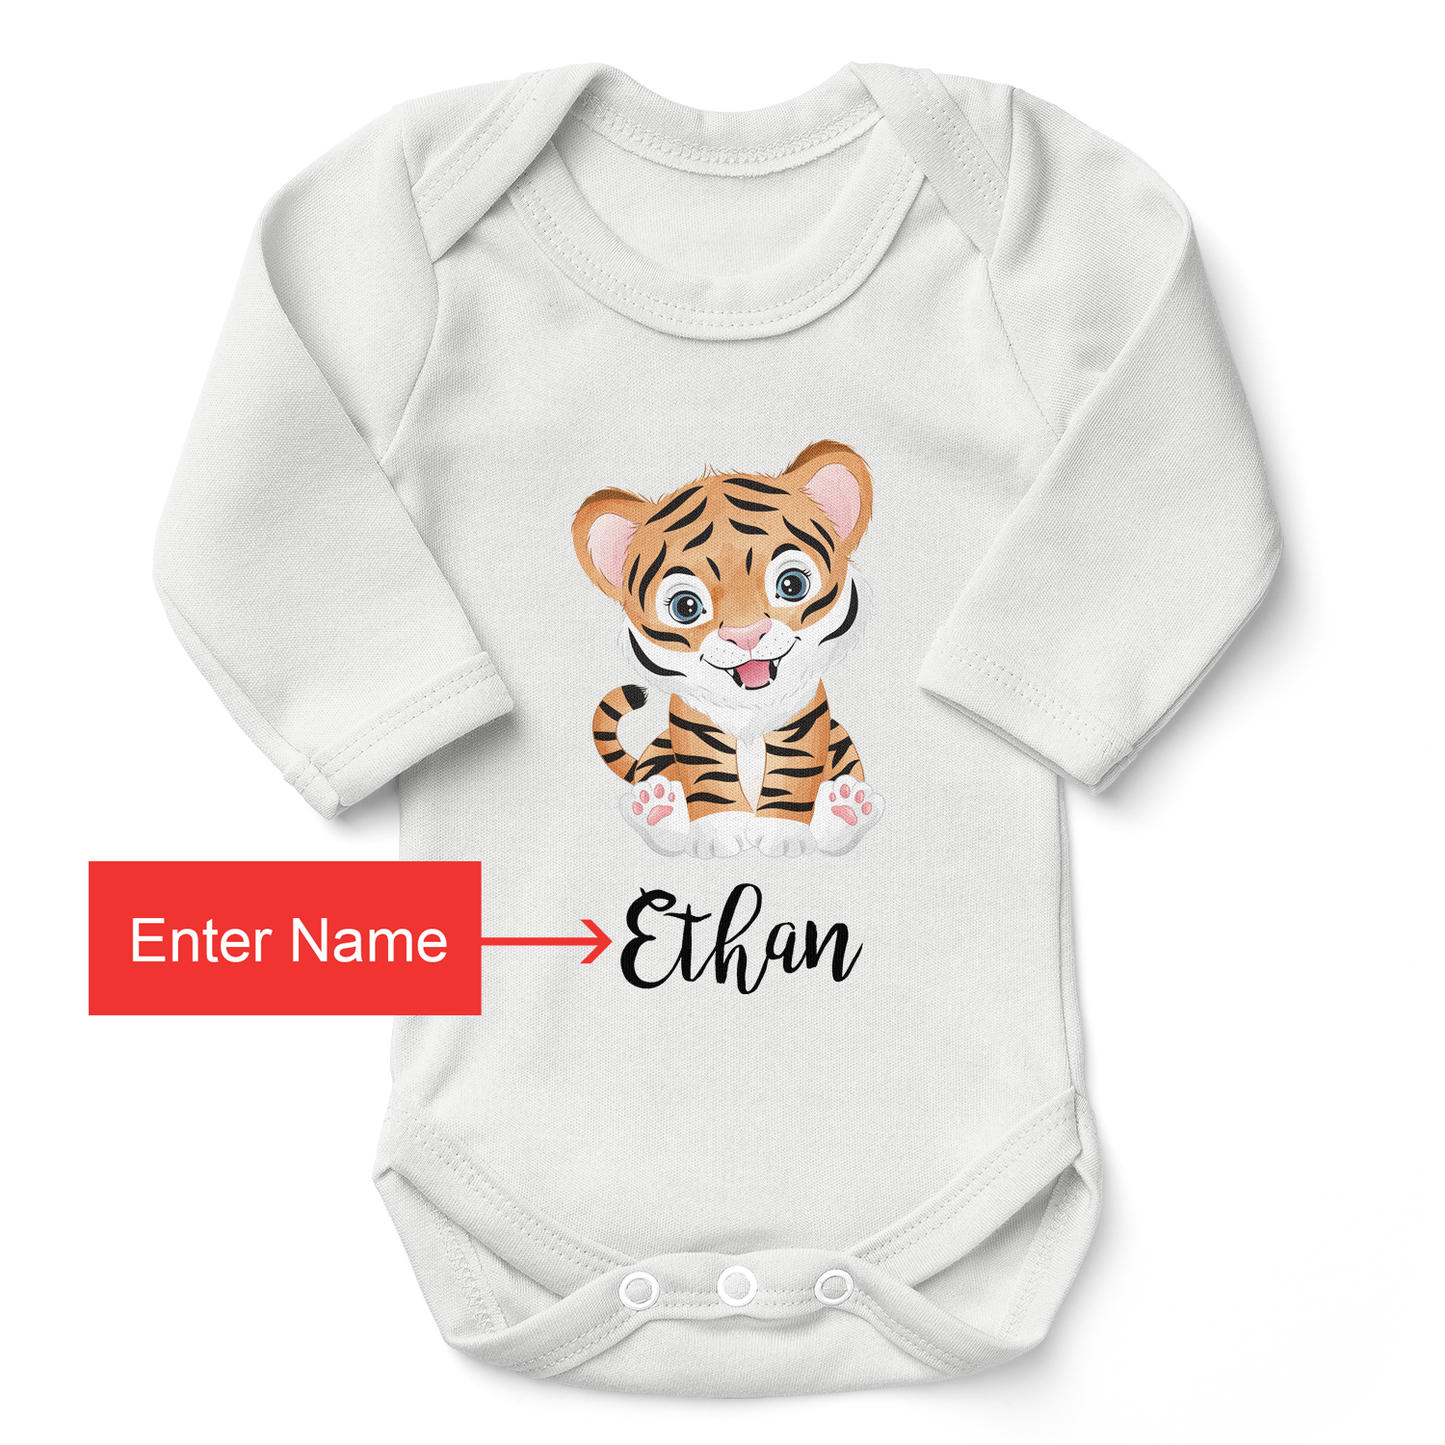 Personalized Matching Mom & Baby Organic Outfits - Tiger Family (White)